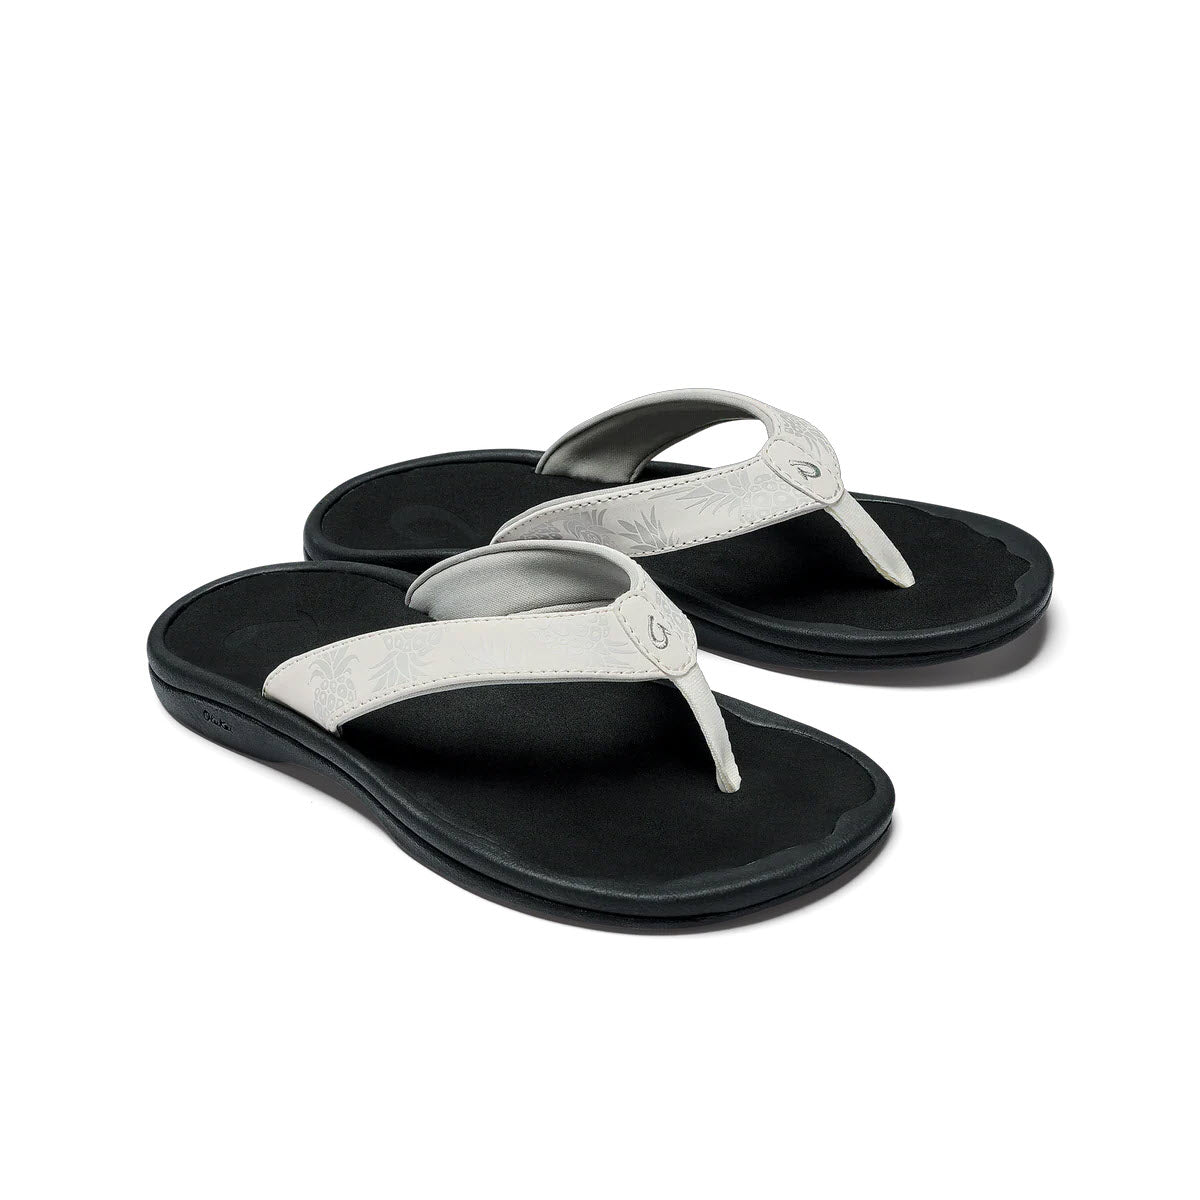 A pair of black, water-resistant flip-flops with silver embellishments on the straps, isolated on a white background. Made by Olukai Ohana Bright White - Womens.